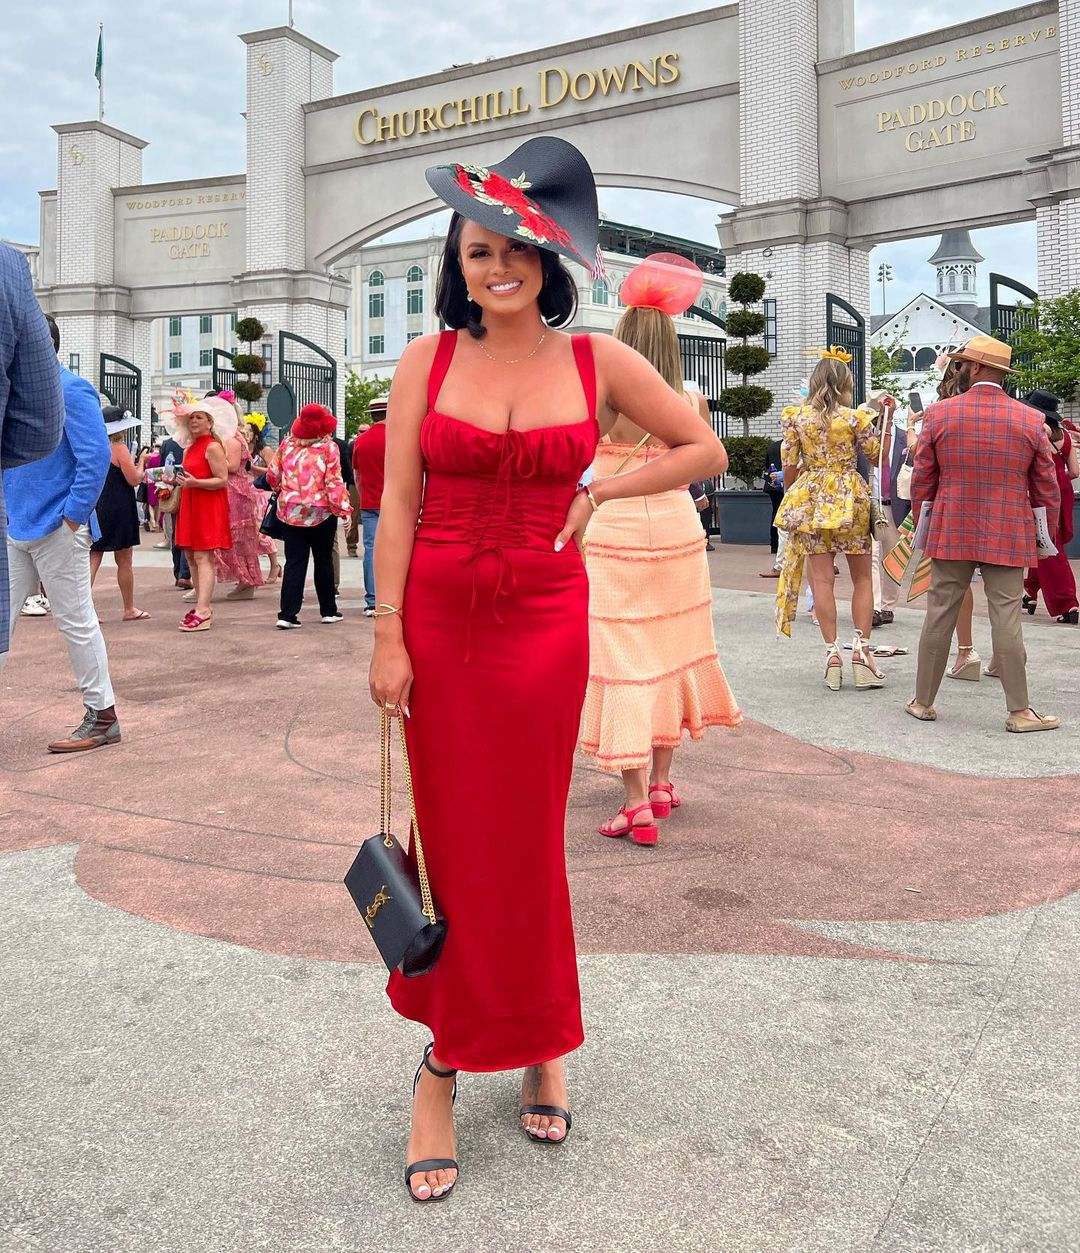 Joy Taylor at the Kentucky Derby is Impressive! - Photo 5